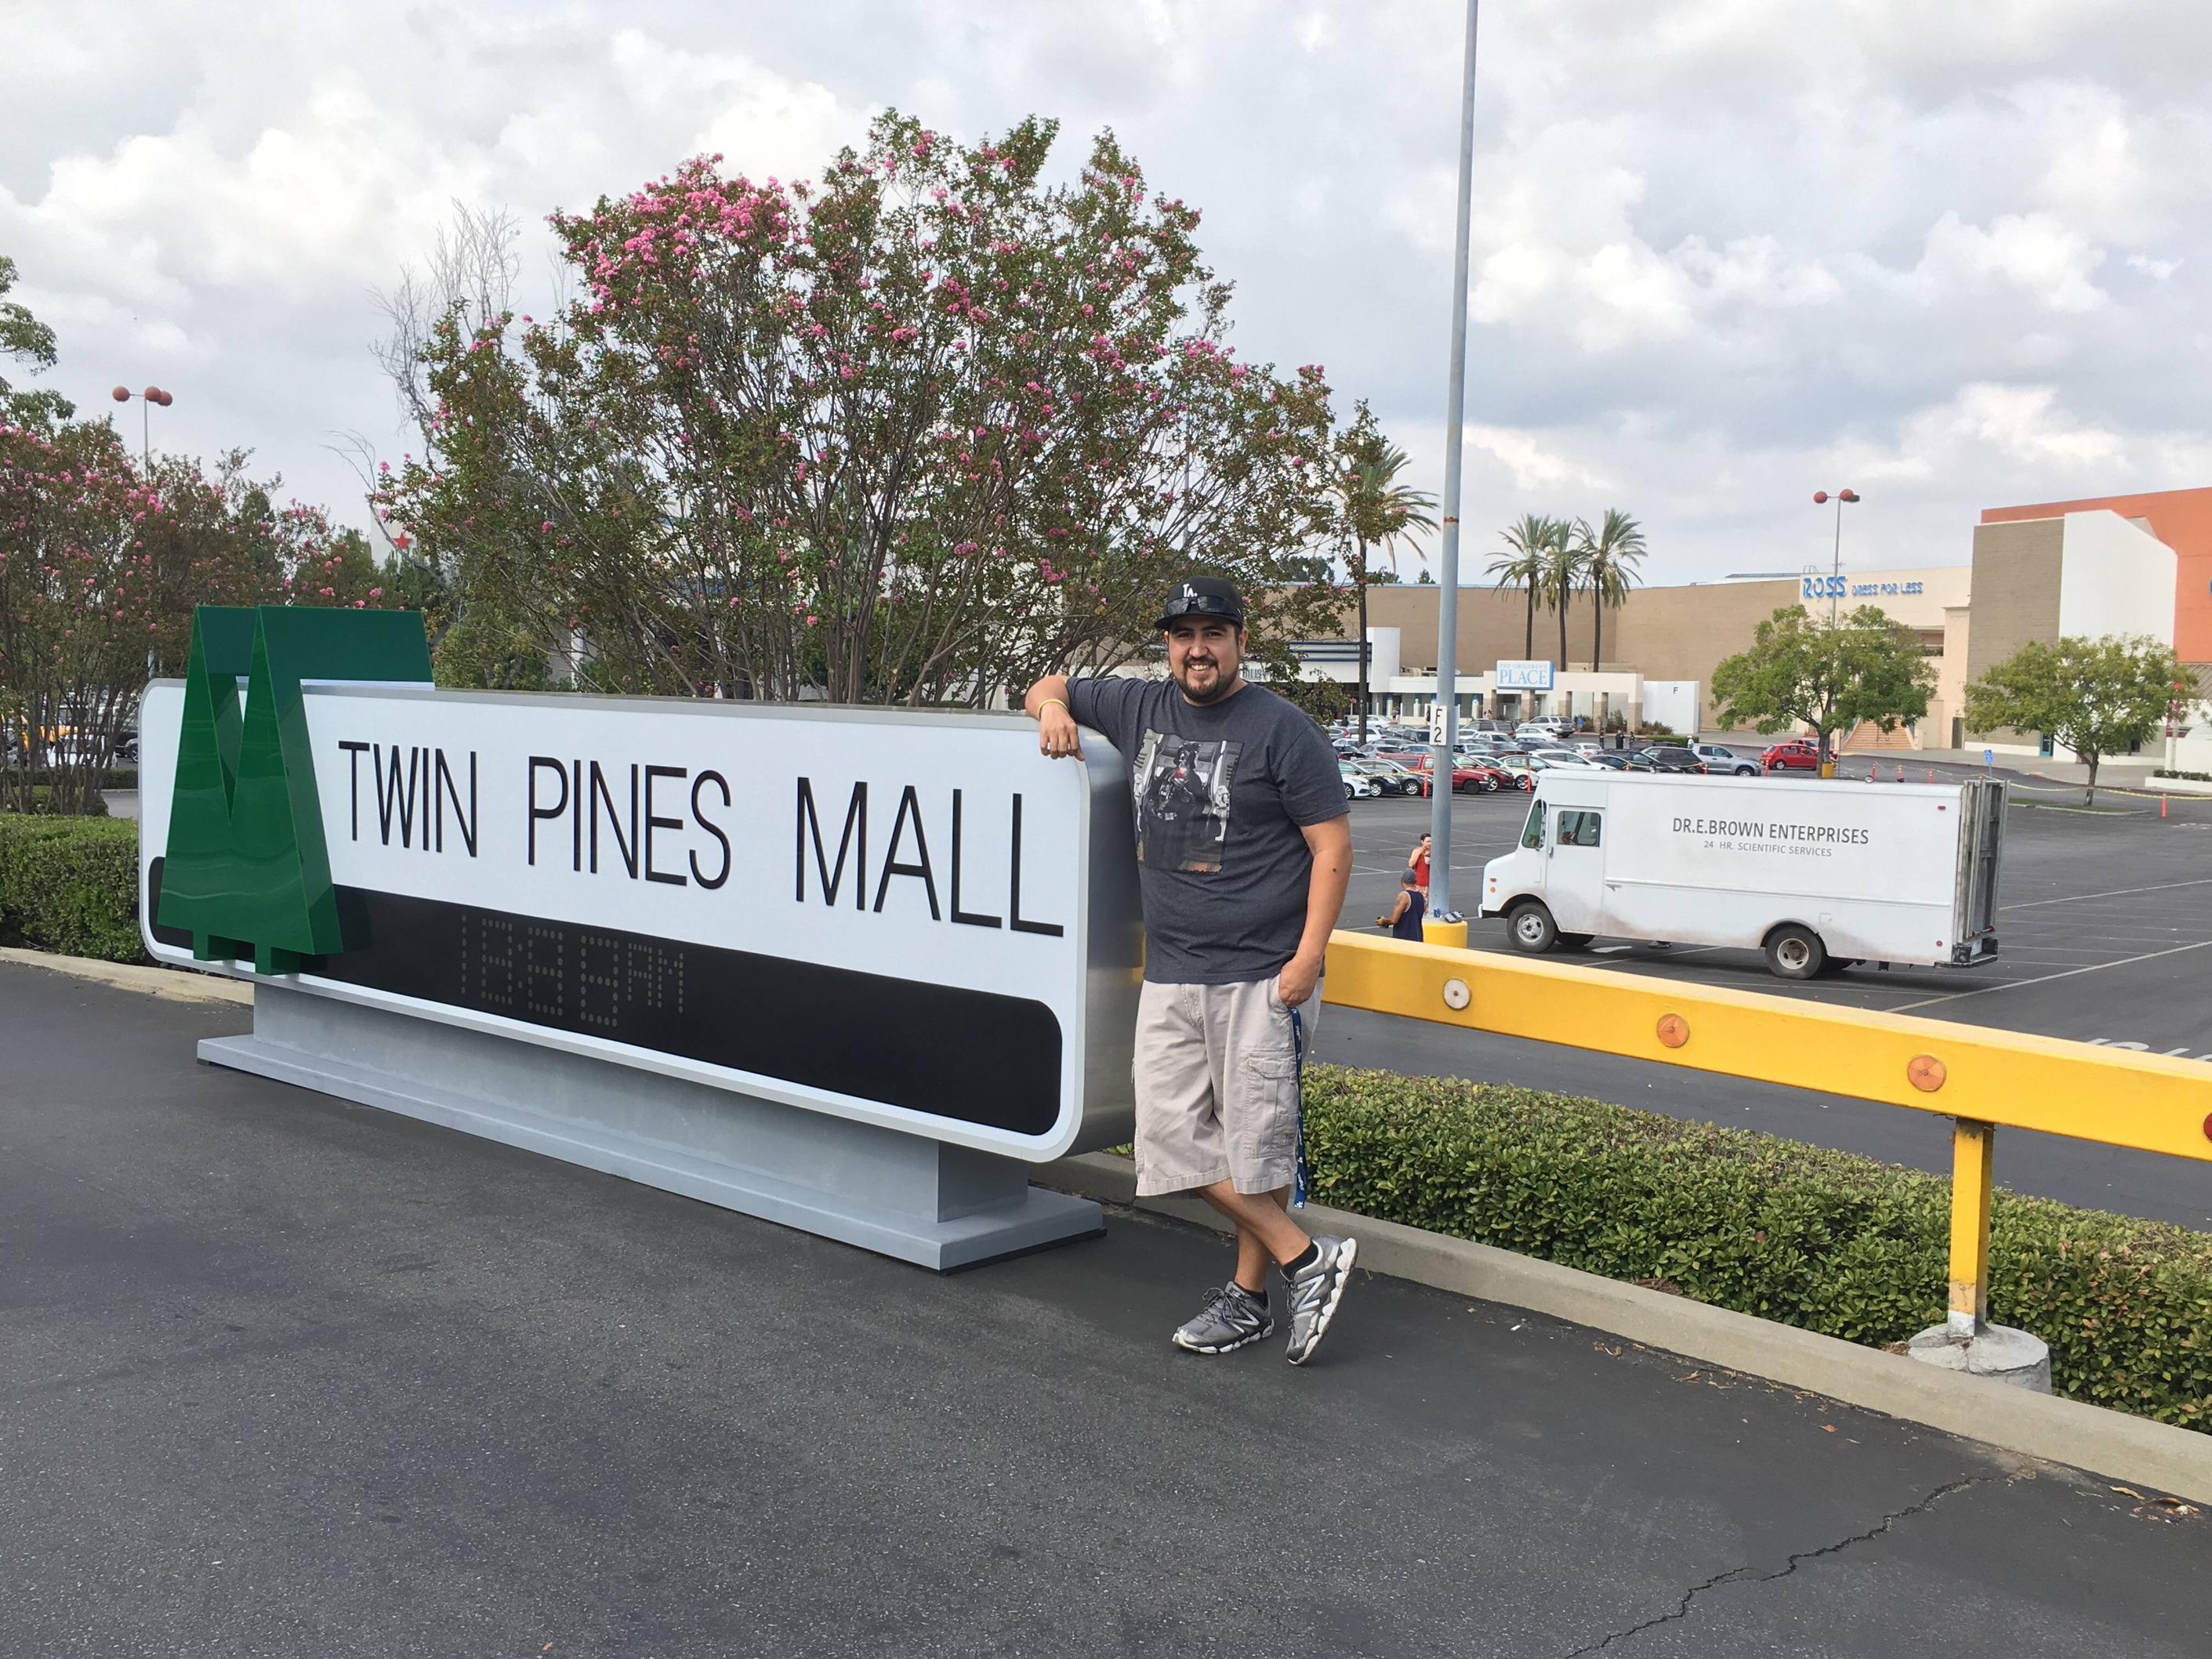 So I got to hang out at the Twin Pines Mall today. : BacktotheFuture